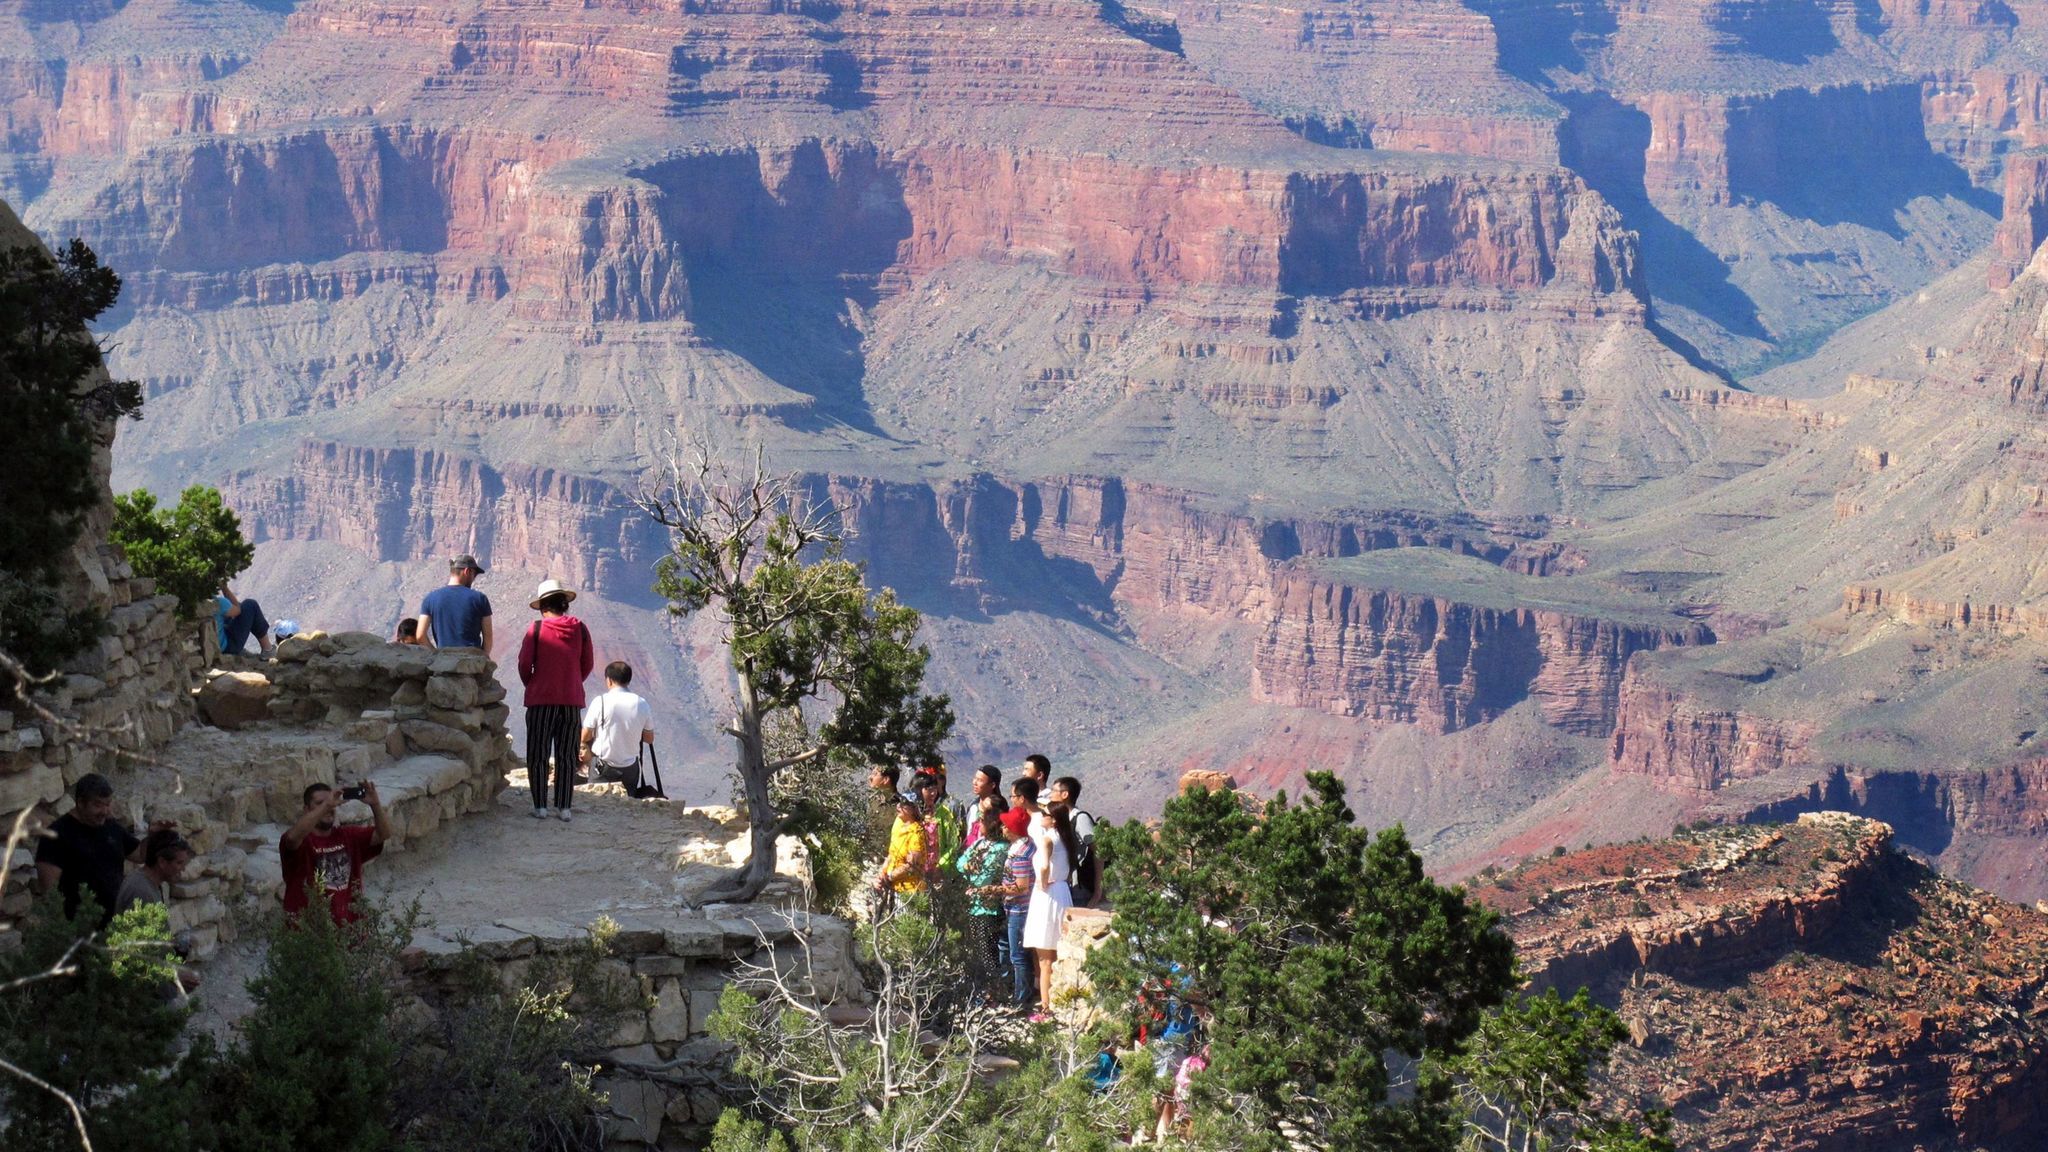 Entry to national parks such as Arizona's Grand Canyon is free this weekend in honor of Veterans Day.